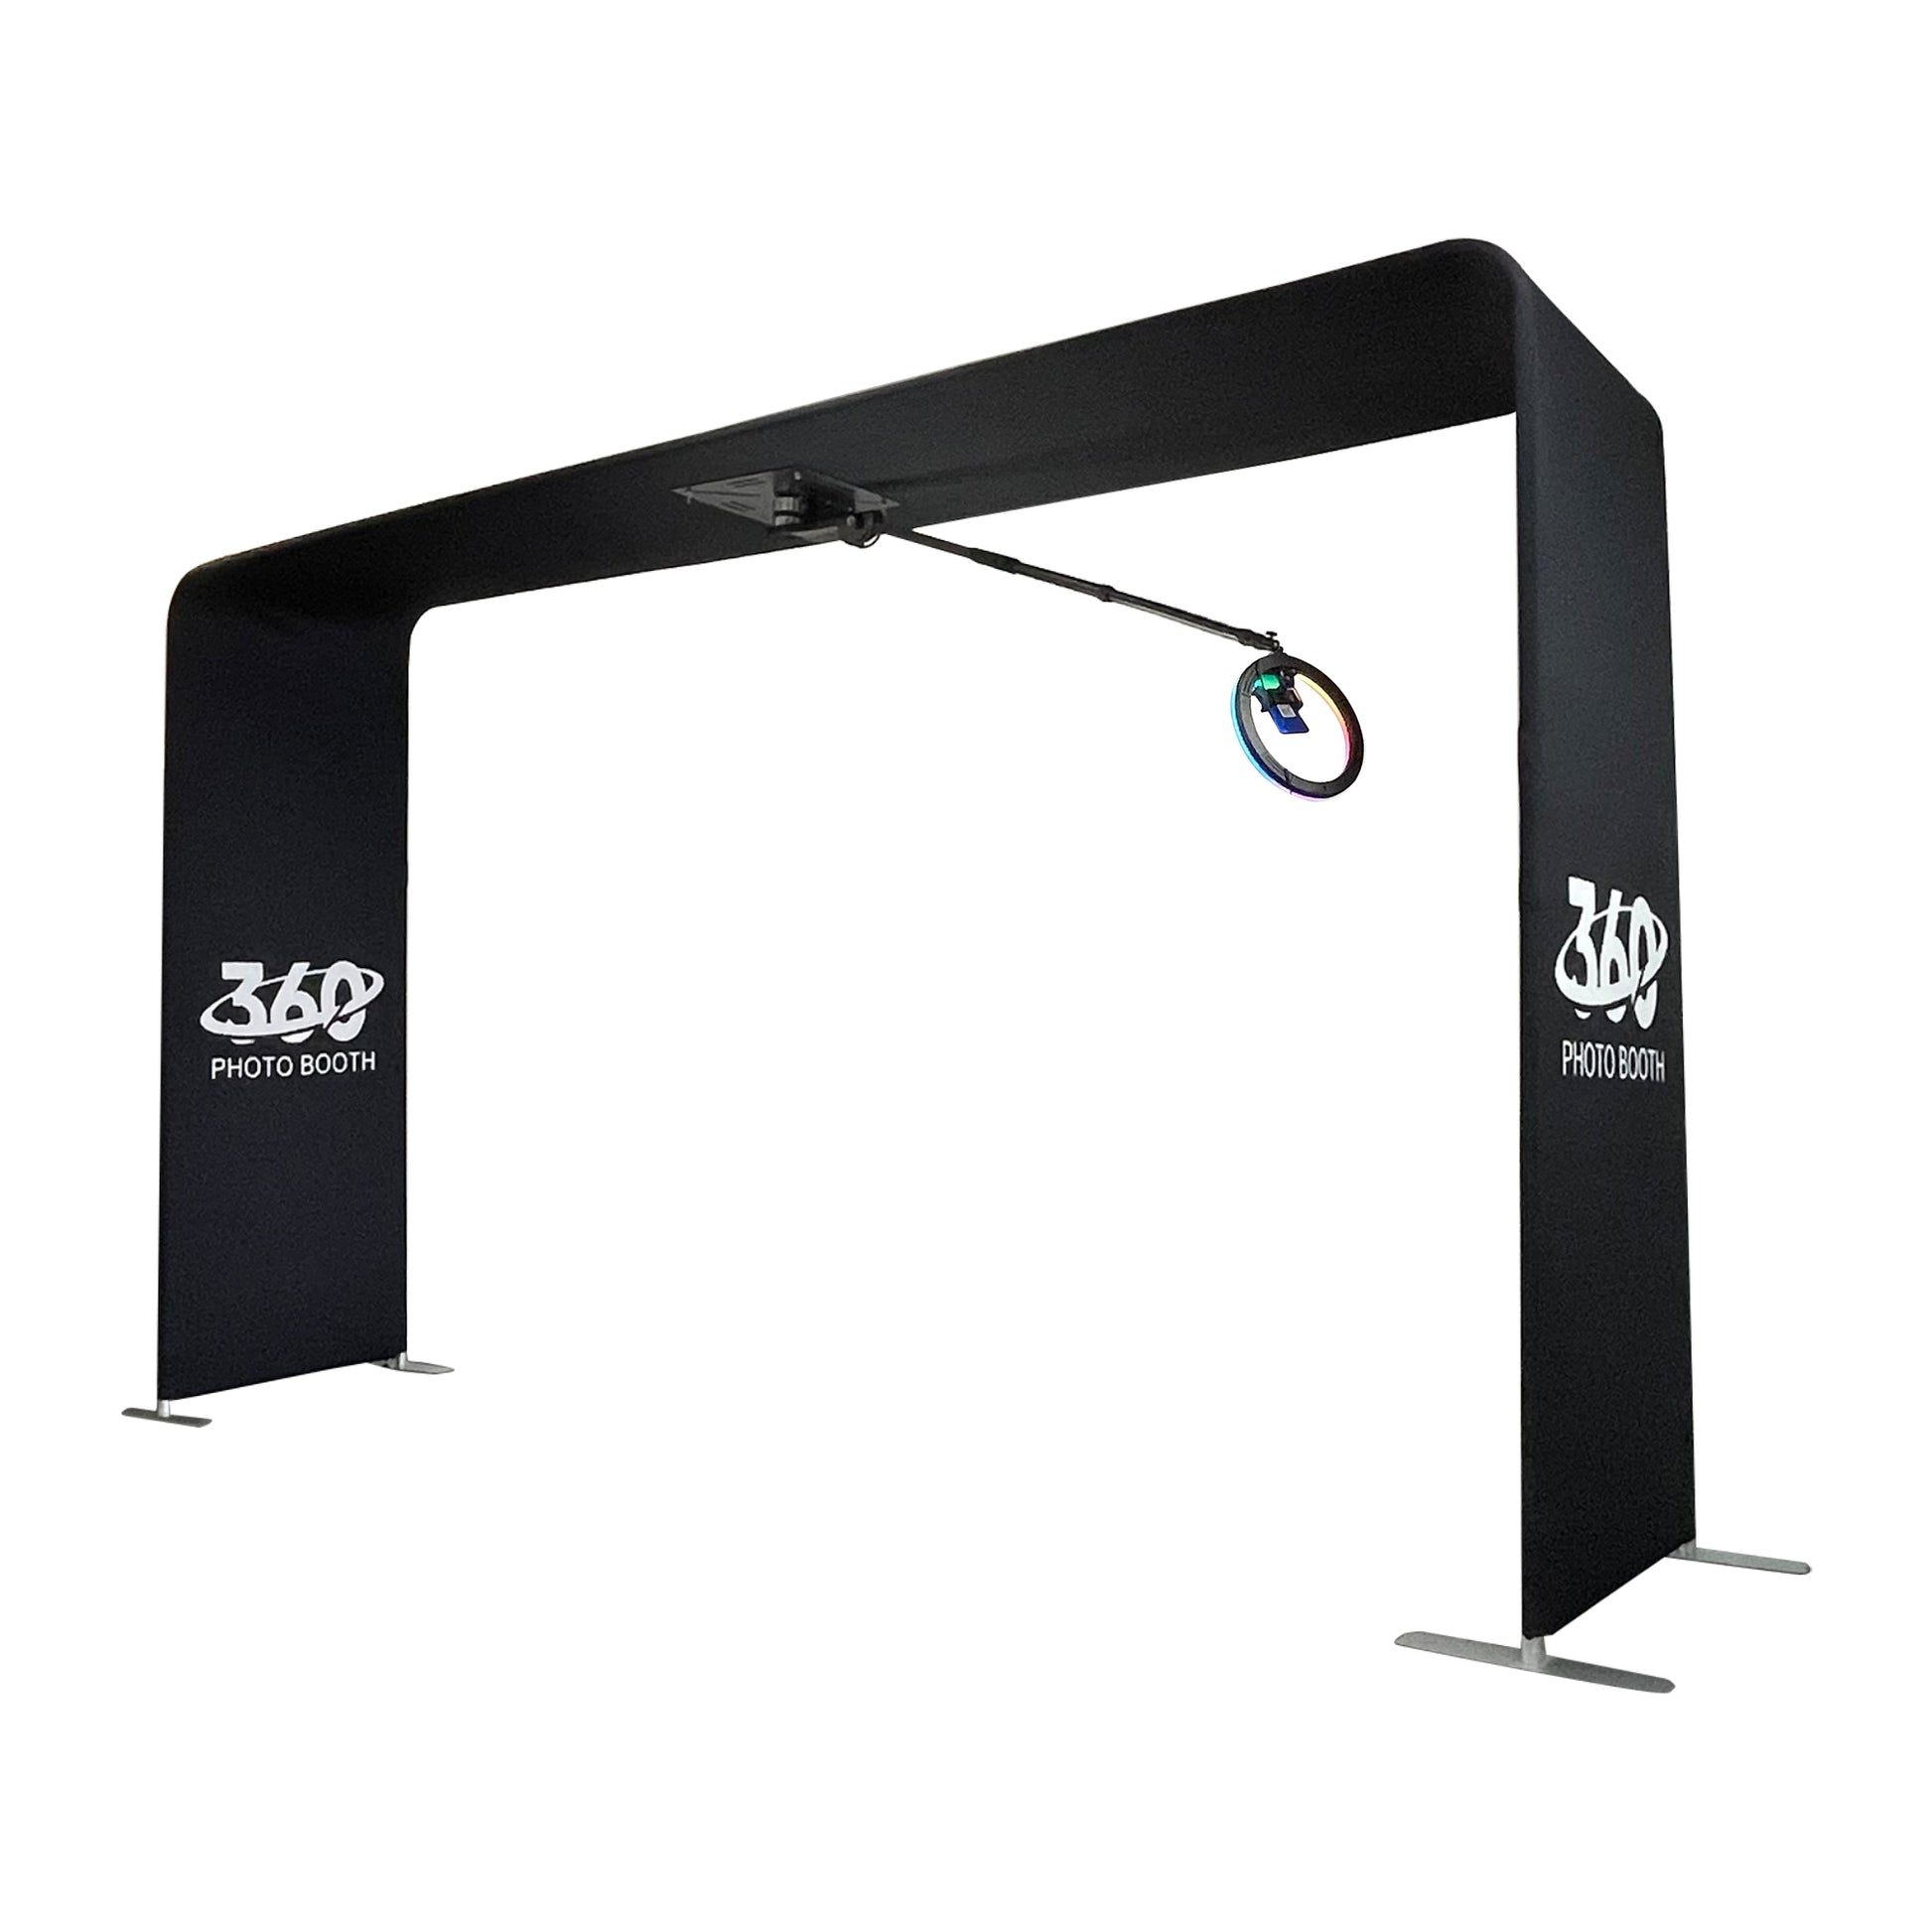 360 Camera Booth - CM7 46 - 360 Photo Booth for sale - 360 booth – 360SPB